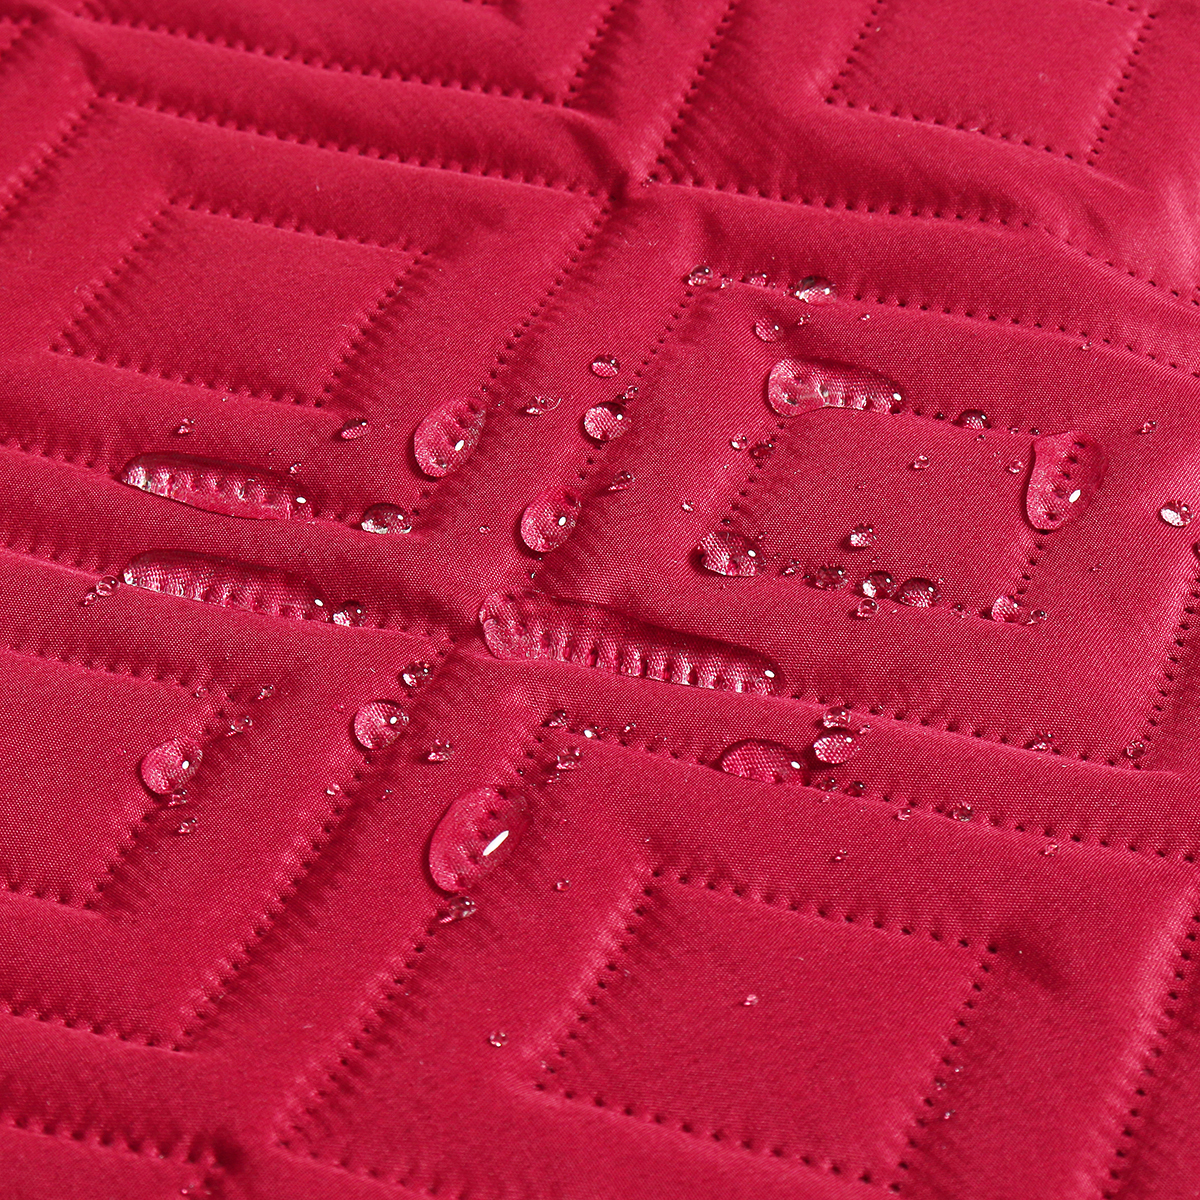 Fuchsia-123-Seat-Pet-Sofa-Couch-Protector-Cover-Removable-Waterproof-Anti-slip-Mat-1495567-5